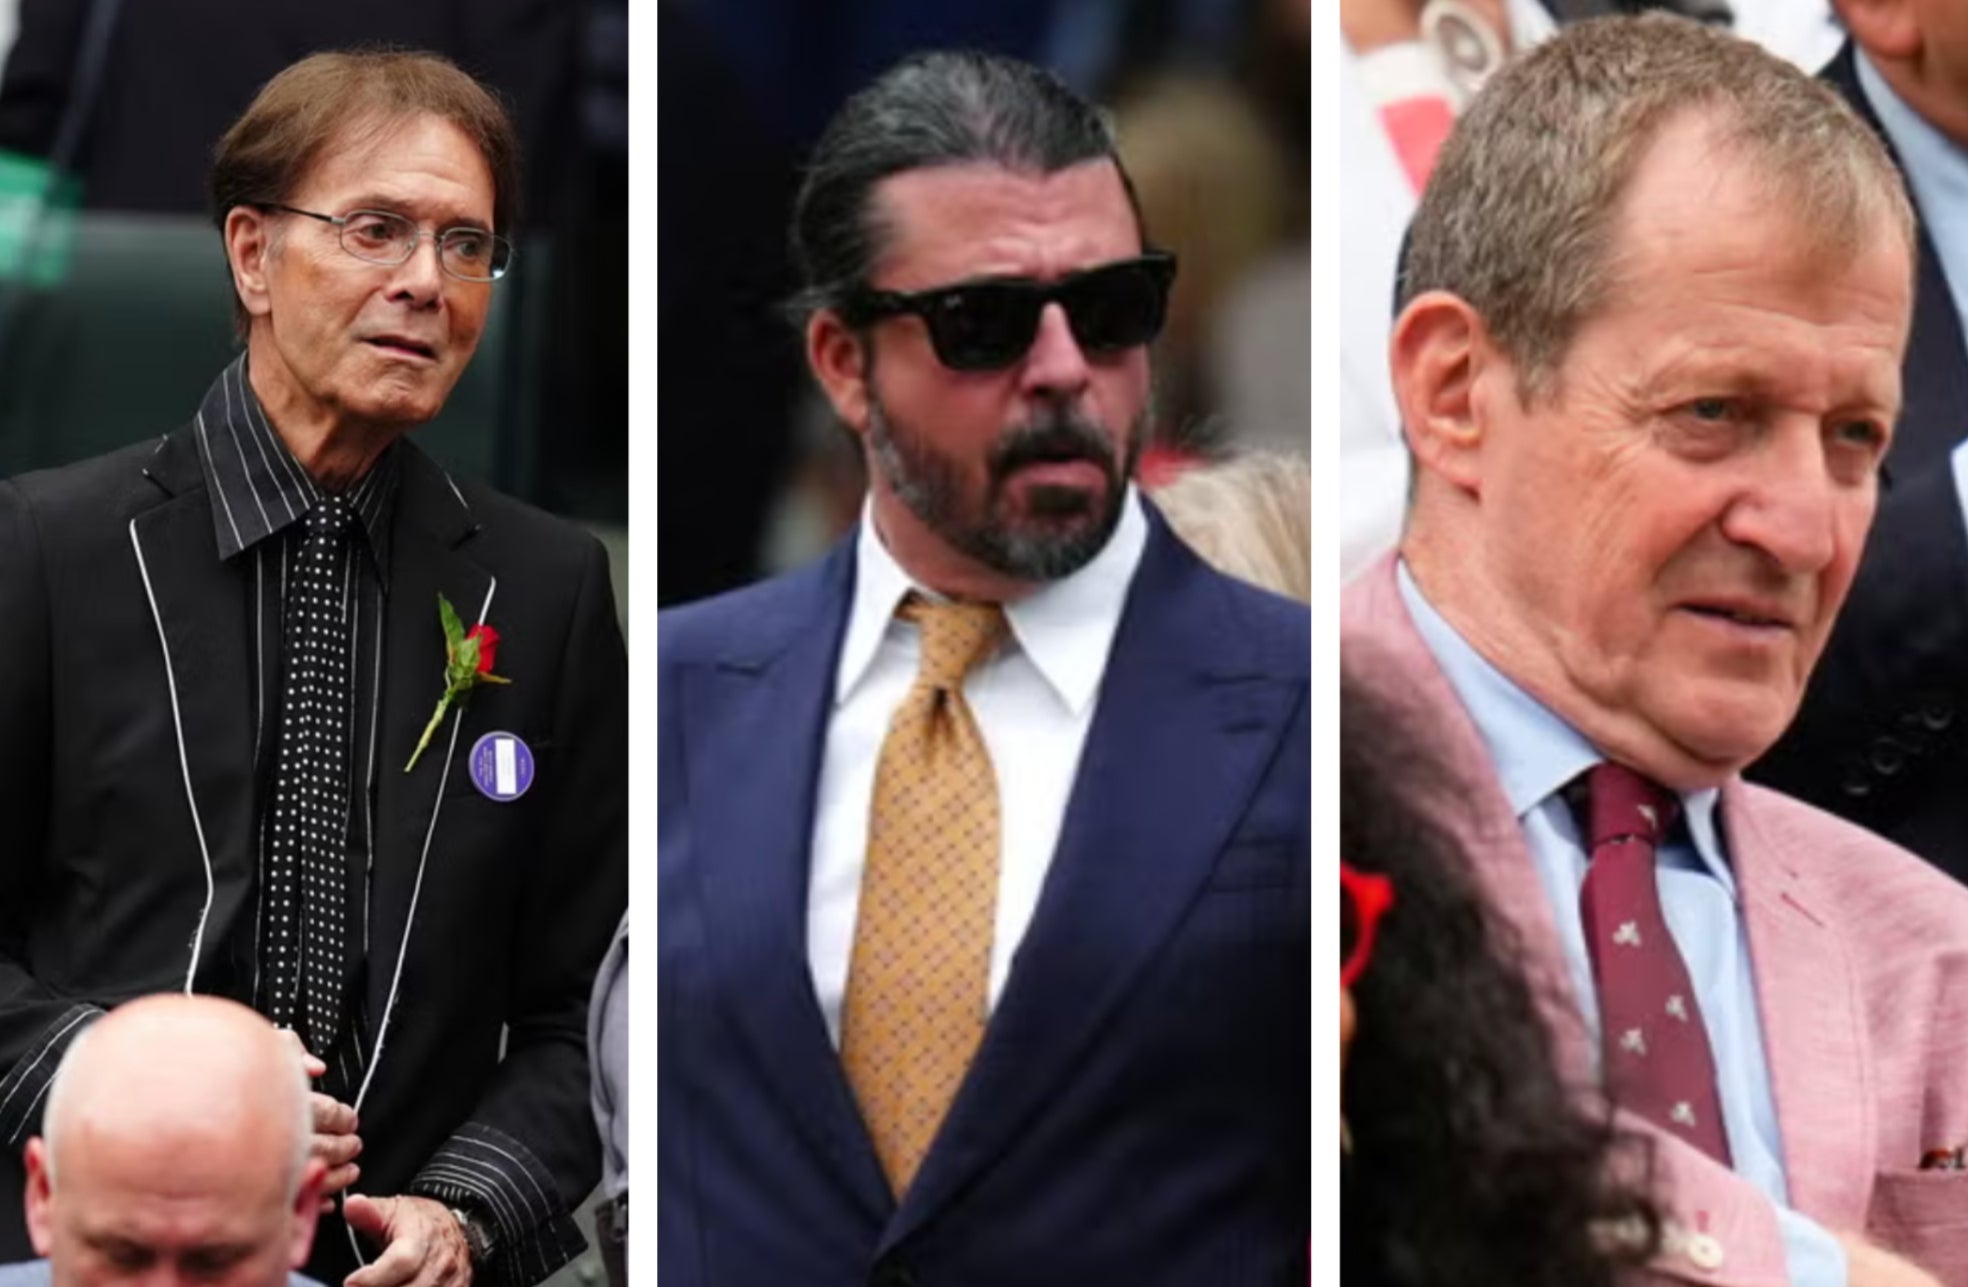 wimbledon, david attenborough, andy murray, carlos alcaraz, emma raducanu, from sir cliff richard to dave grohl: who’s who in the royal box on wimbledon day two?